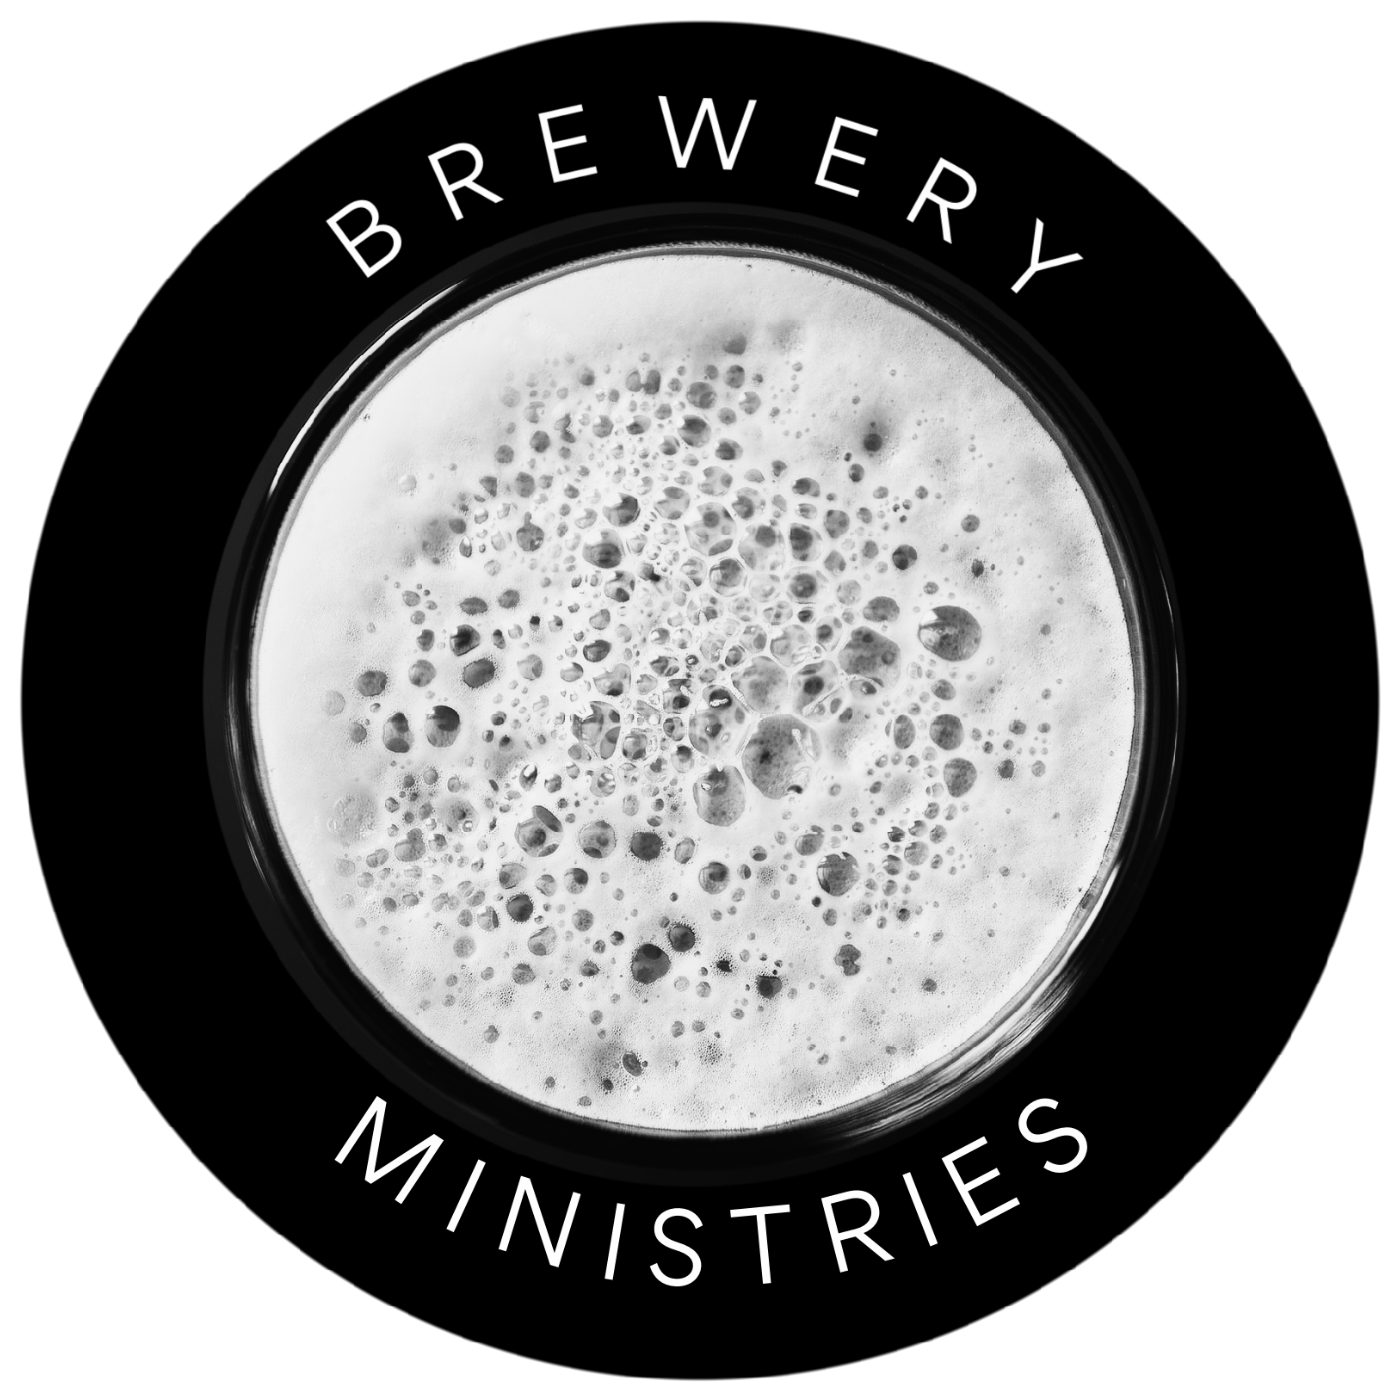 Brewery Ministries